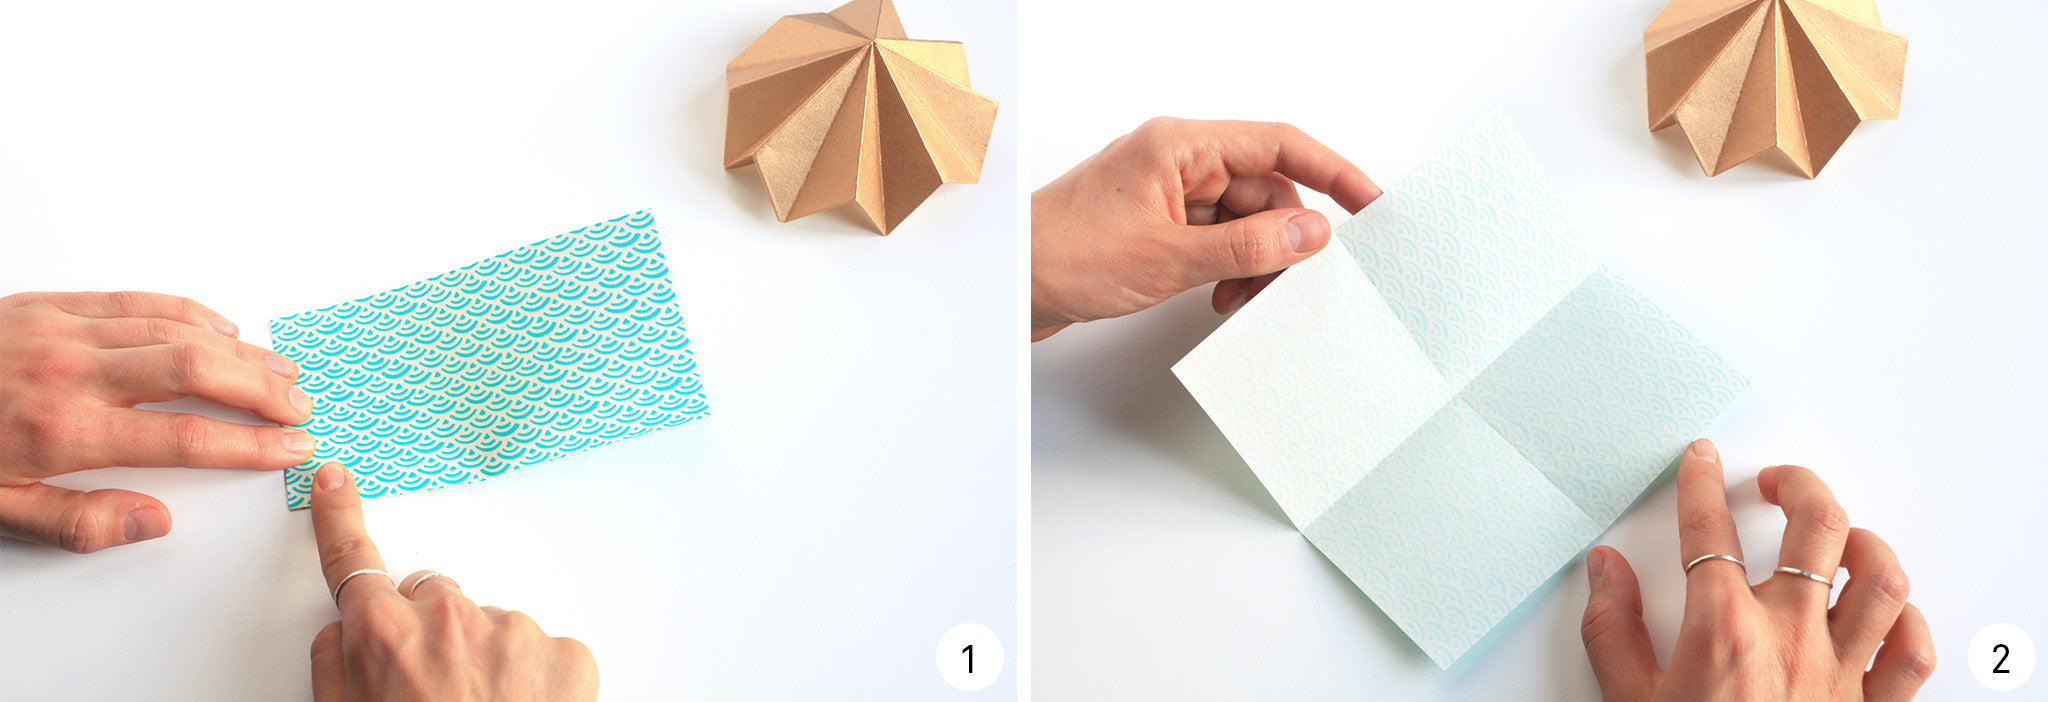 photos-explanations-steps-1-2-article-blog-tuto-pampille-origami-adeline-klam